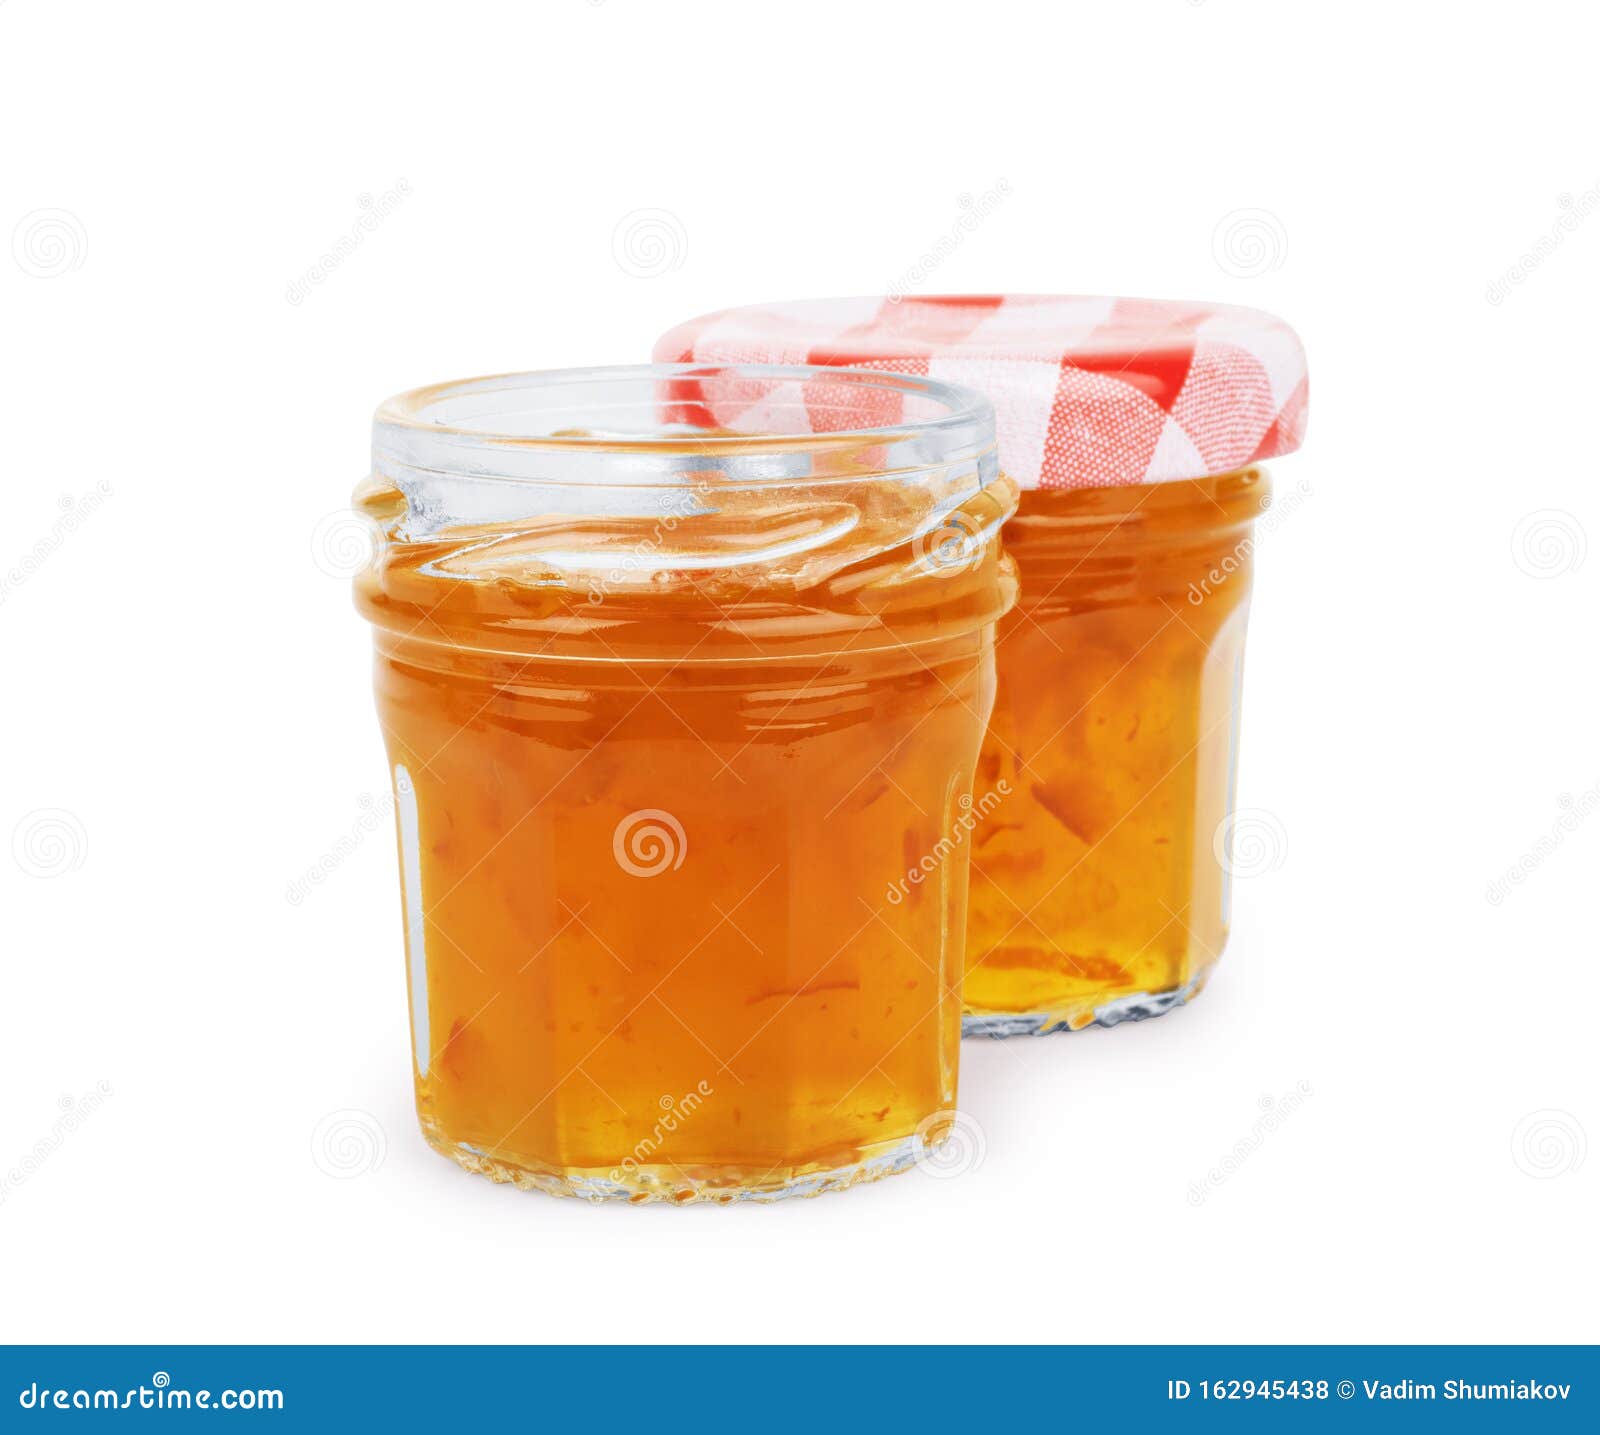 jam in a glass jar on a white background